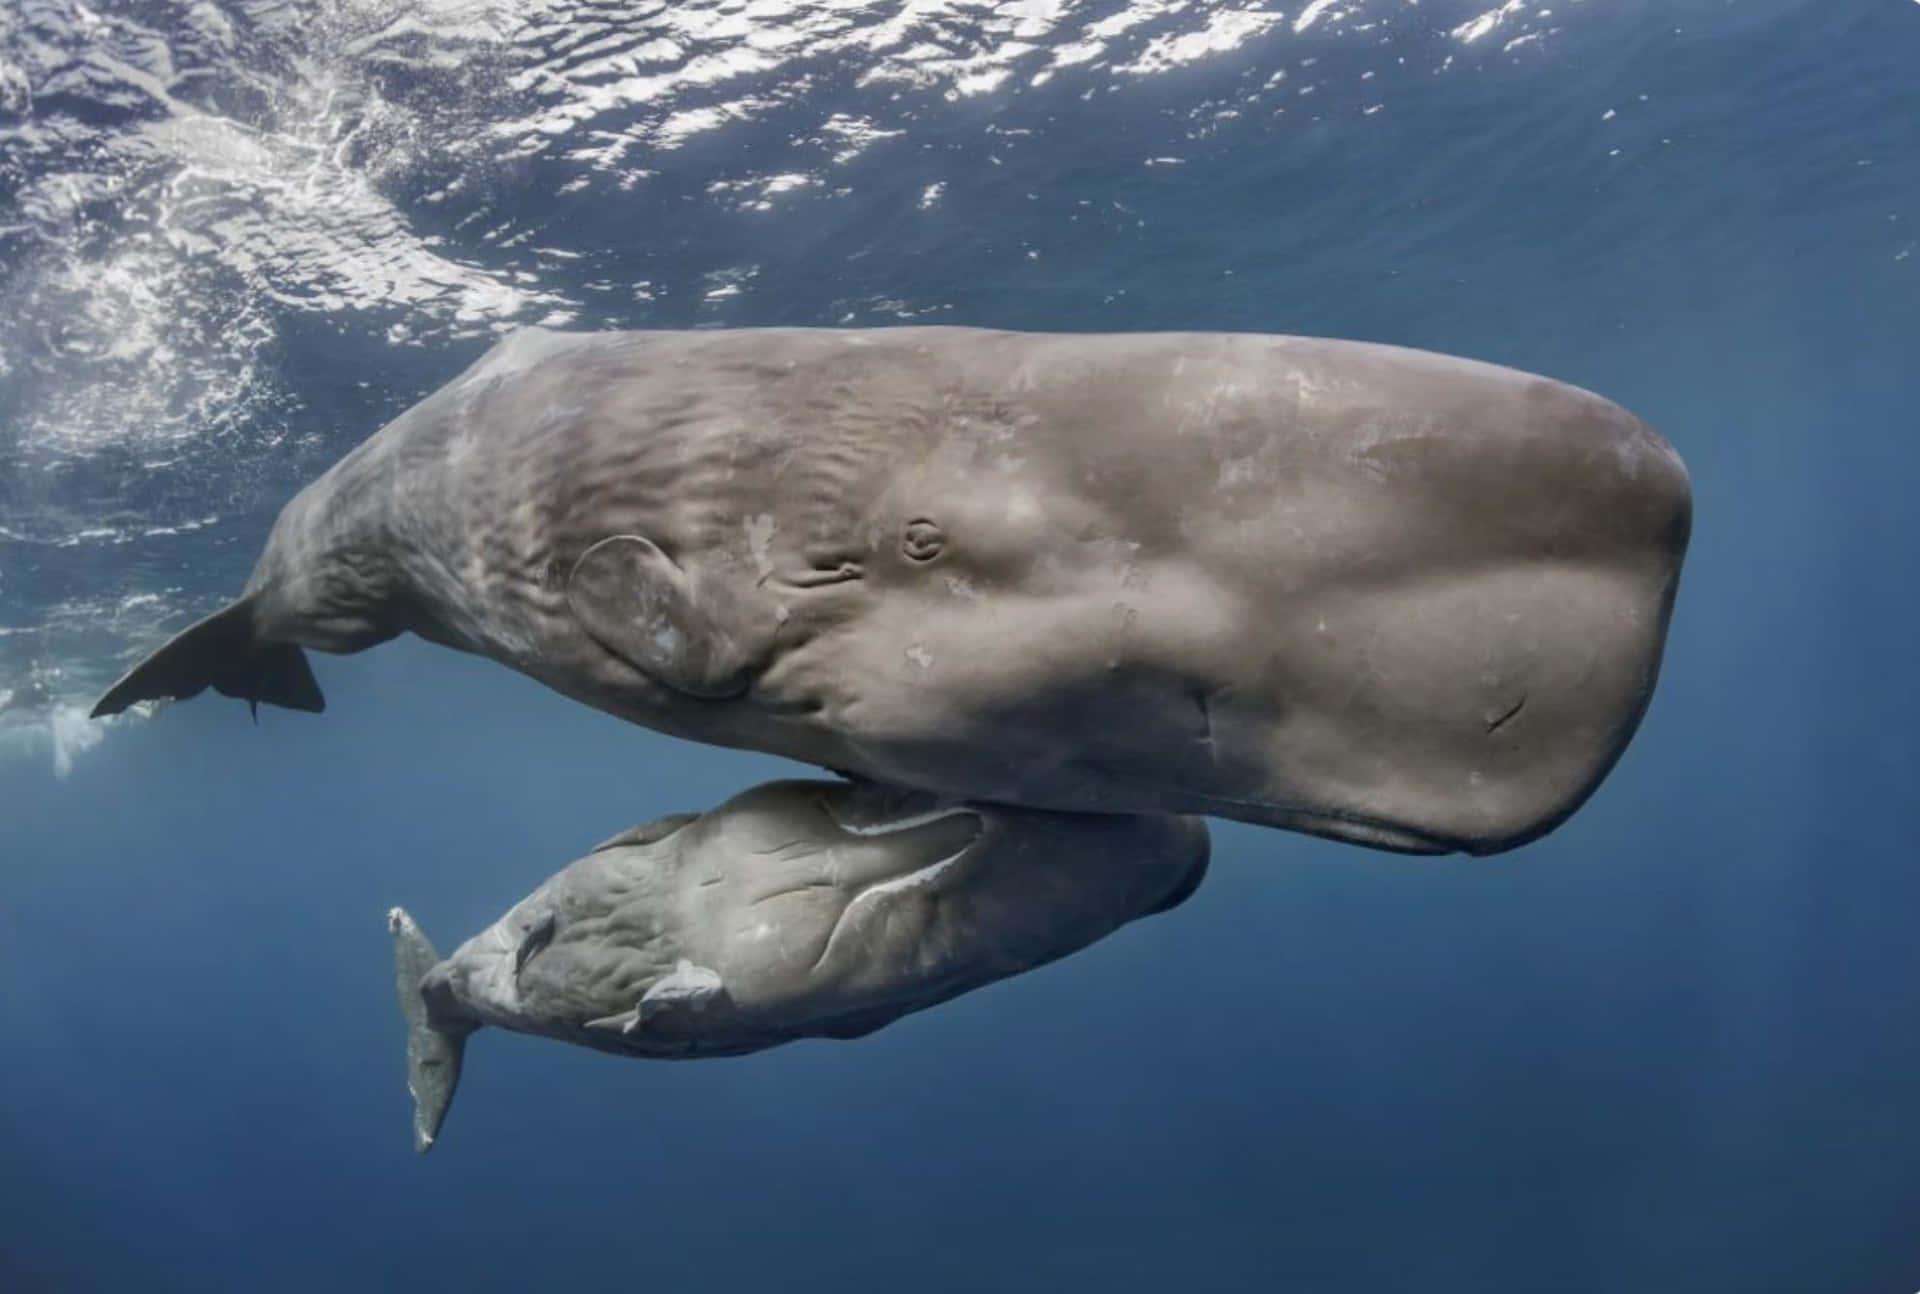 "The Majestic Sperm Whale"